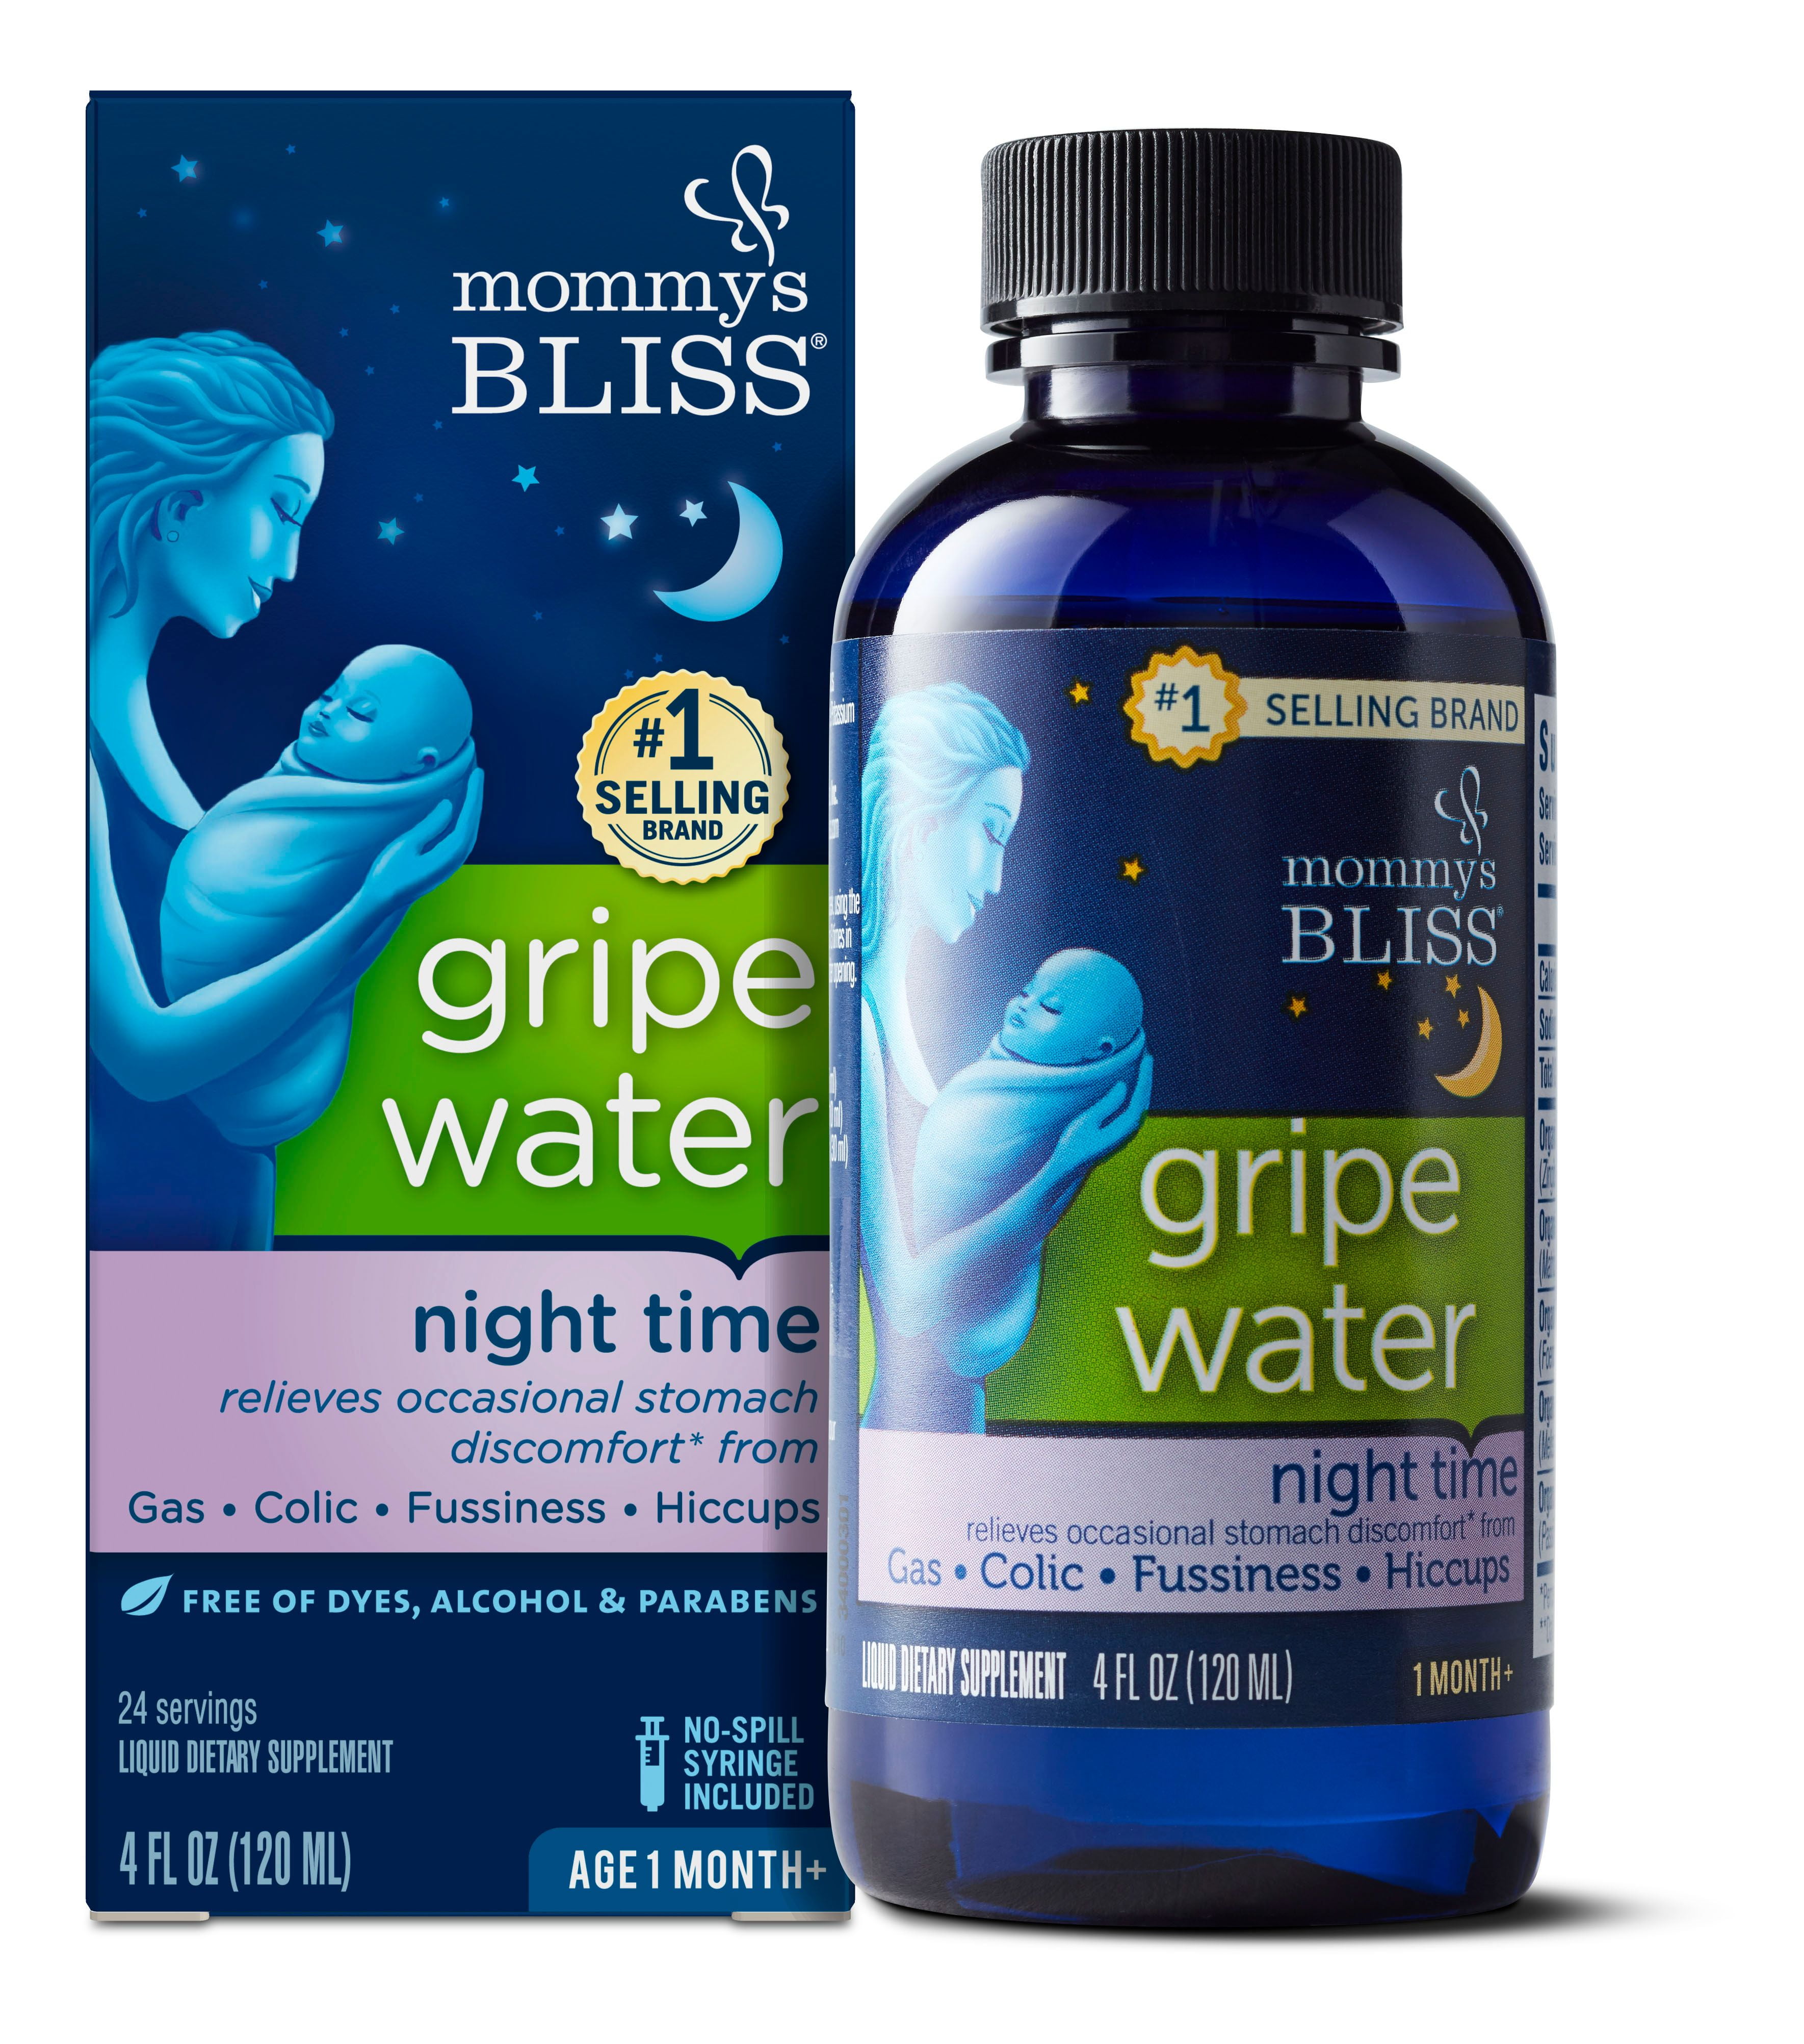 Mommy's Bliss Night Time Gripe Water, 1 